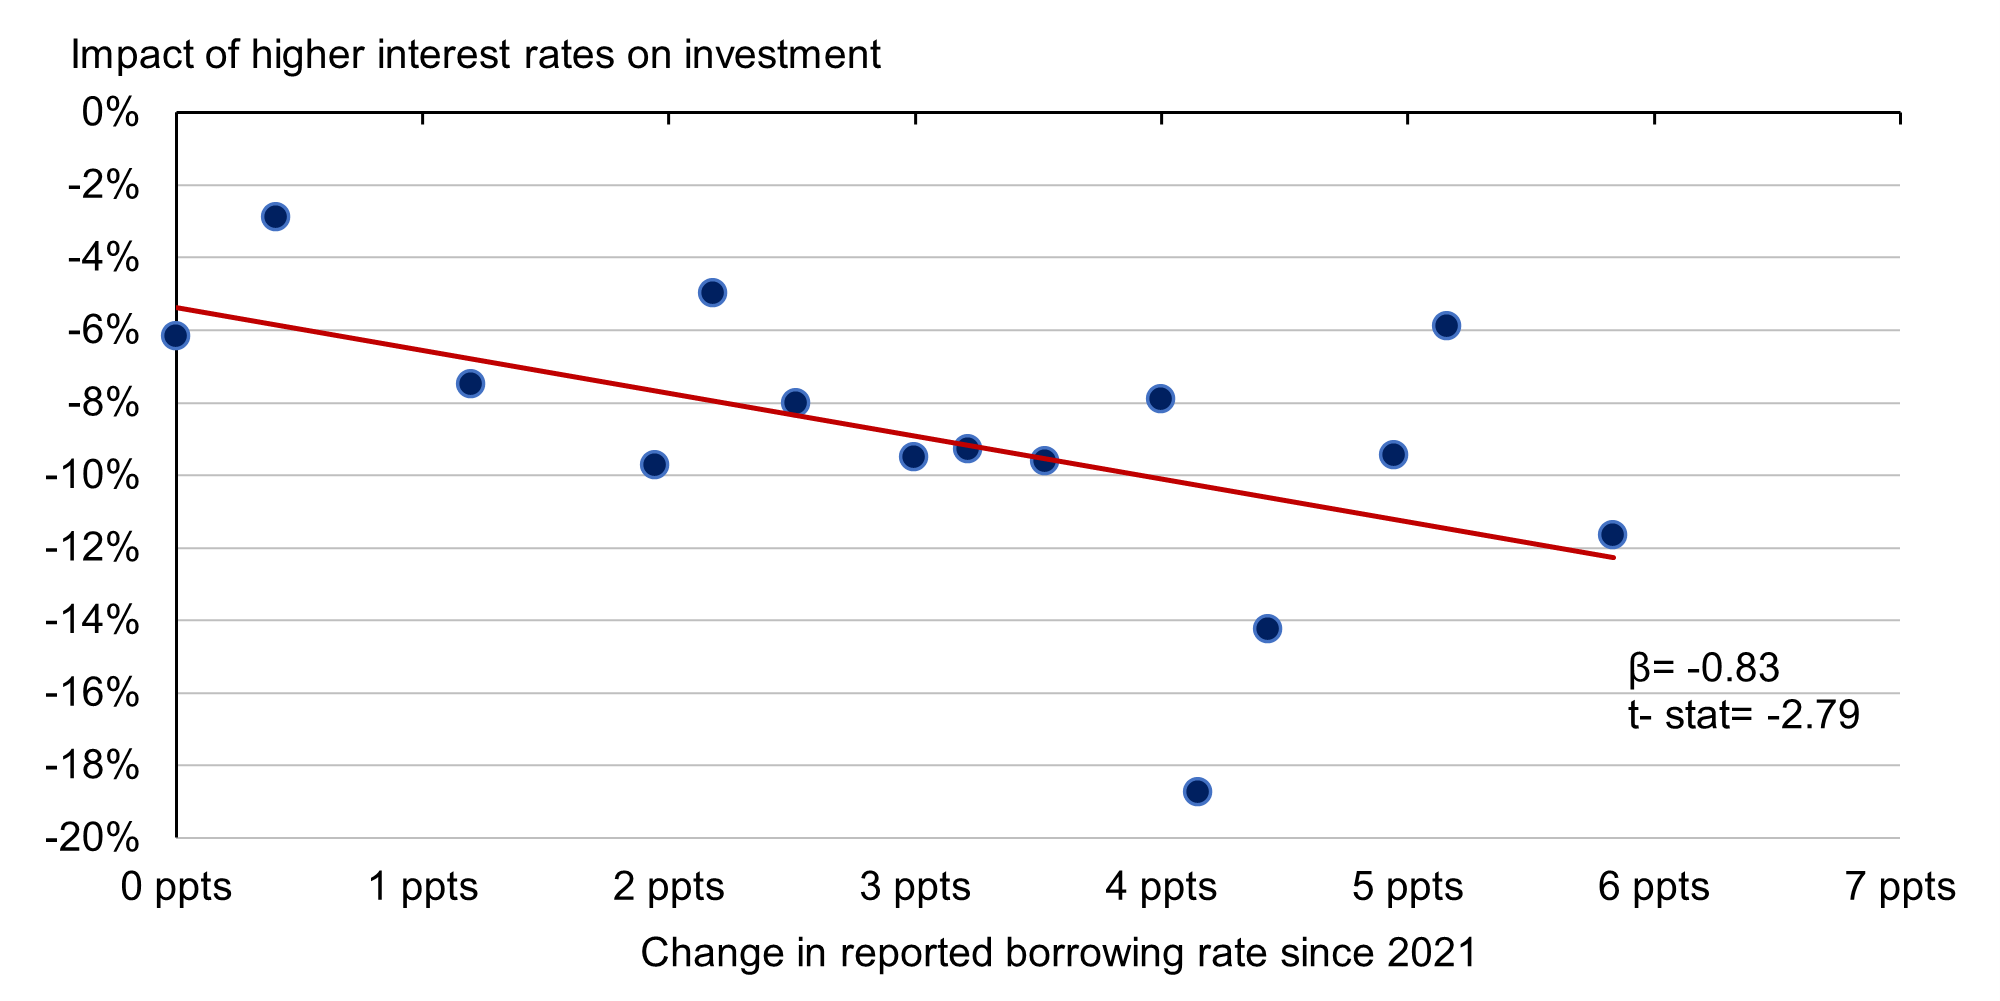 Figure 4 Binned scatterplot of reported changes in borrowing costs since 2021 and reported impact of higher interest rates on investment